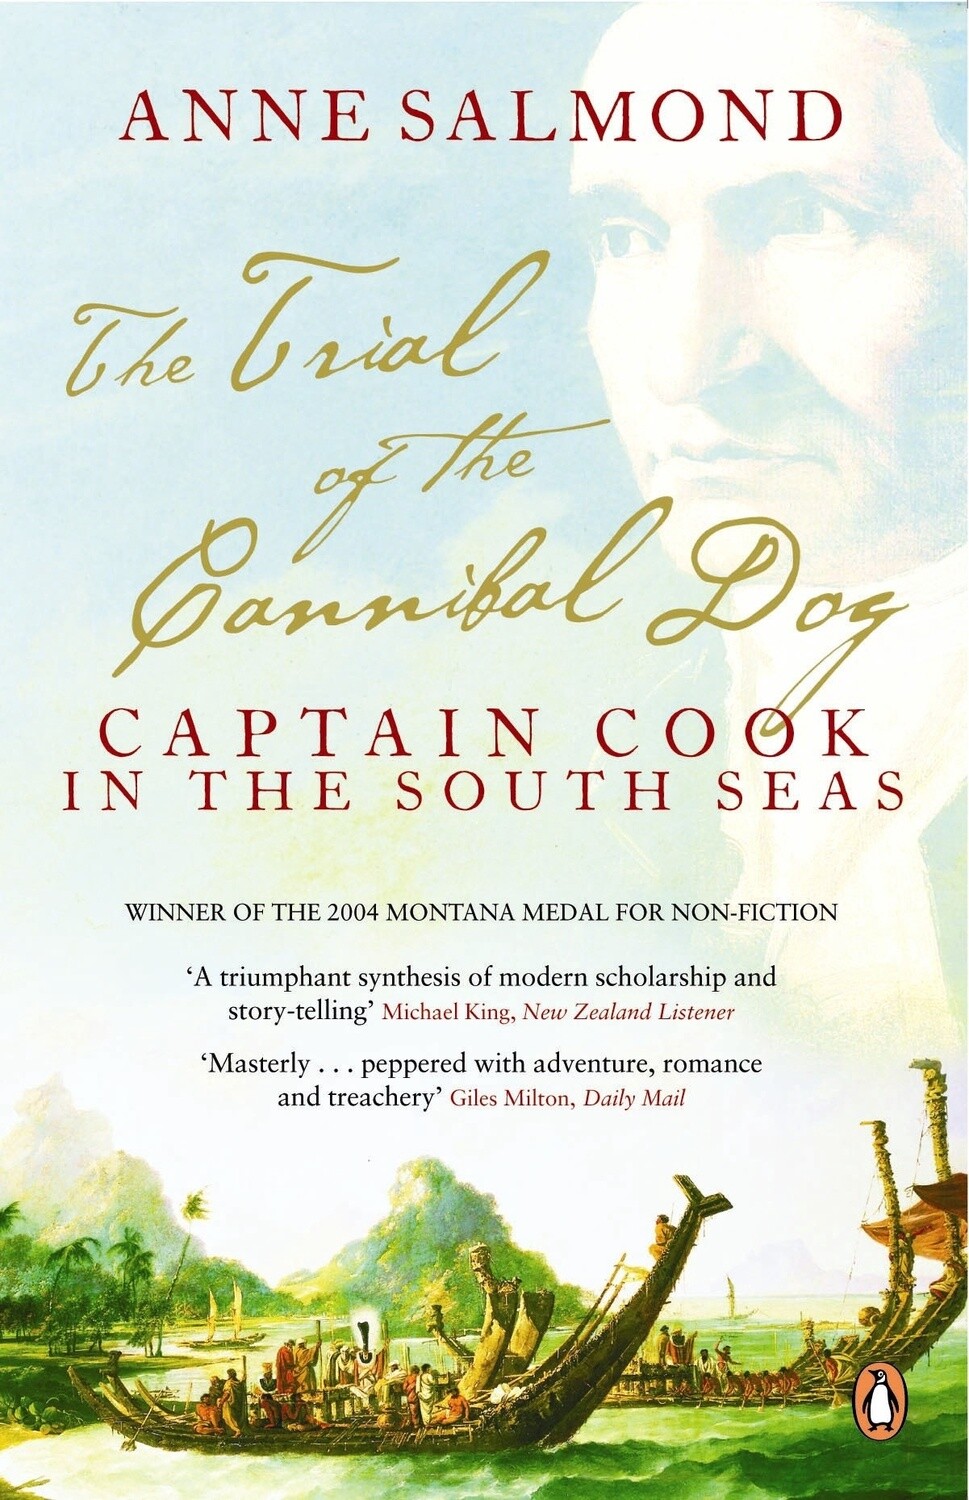 The Trial of the Cannibal Dog - Captain Cook in the South Seas by Anne Salmond